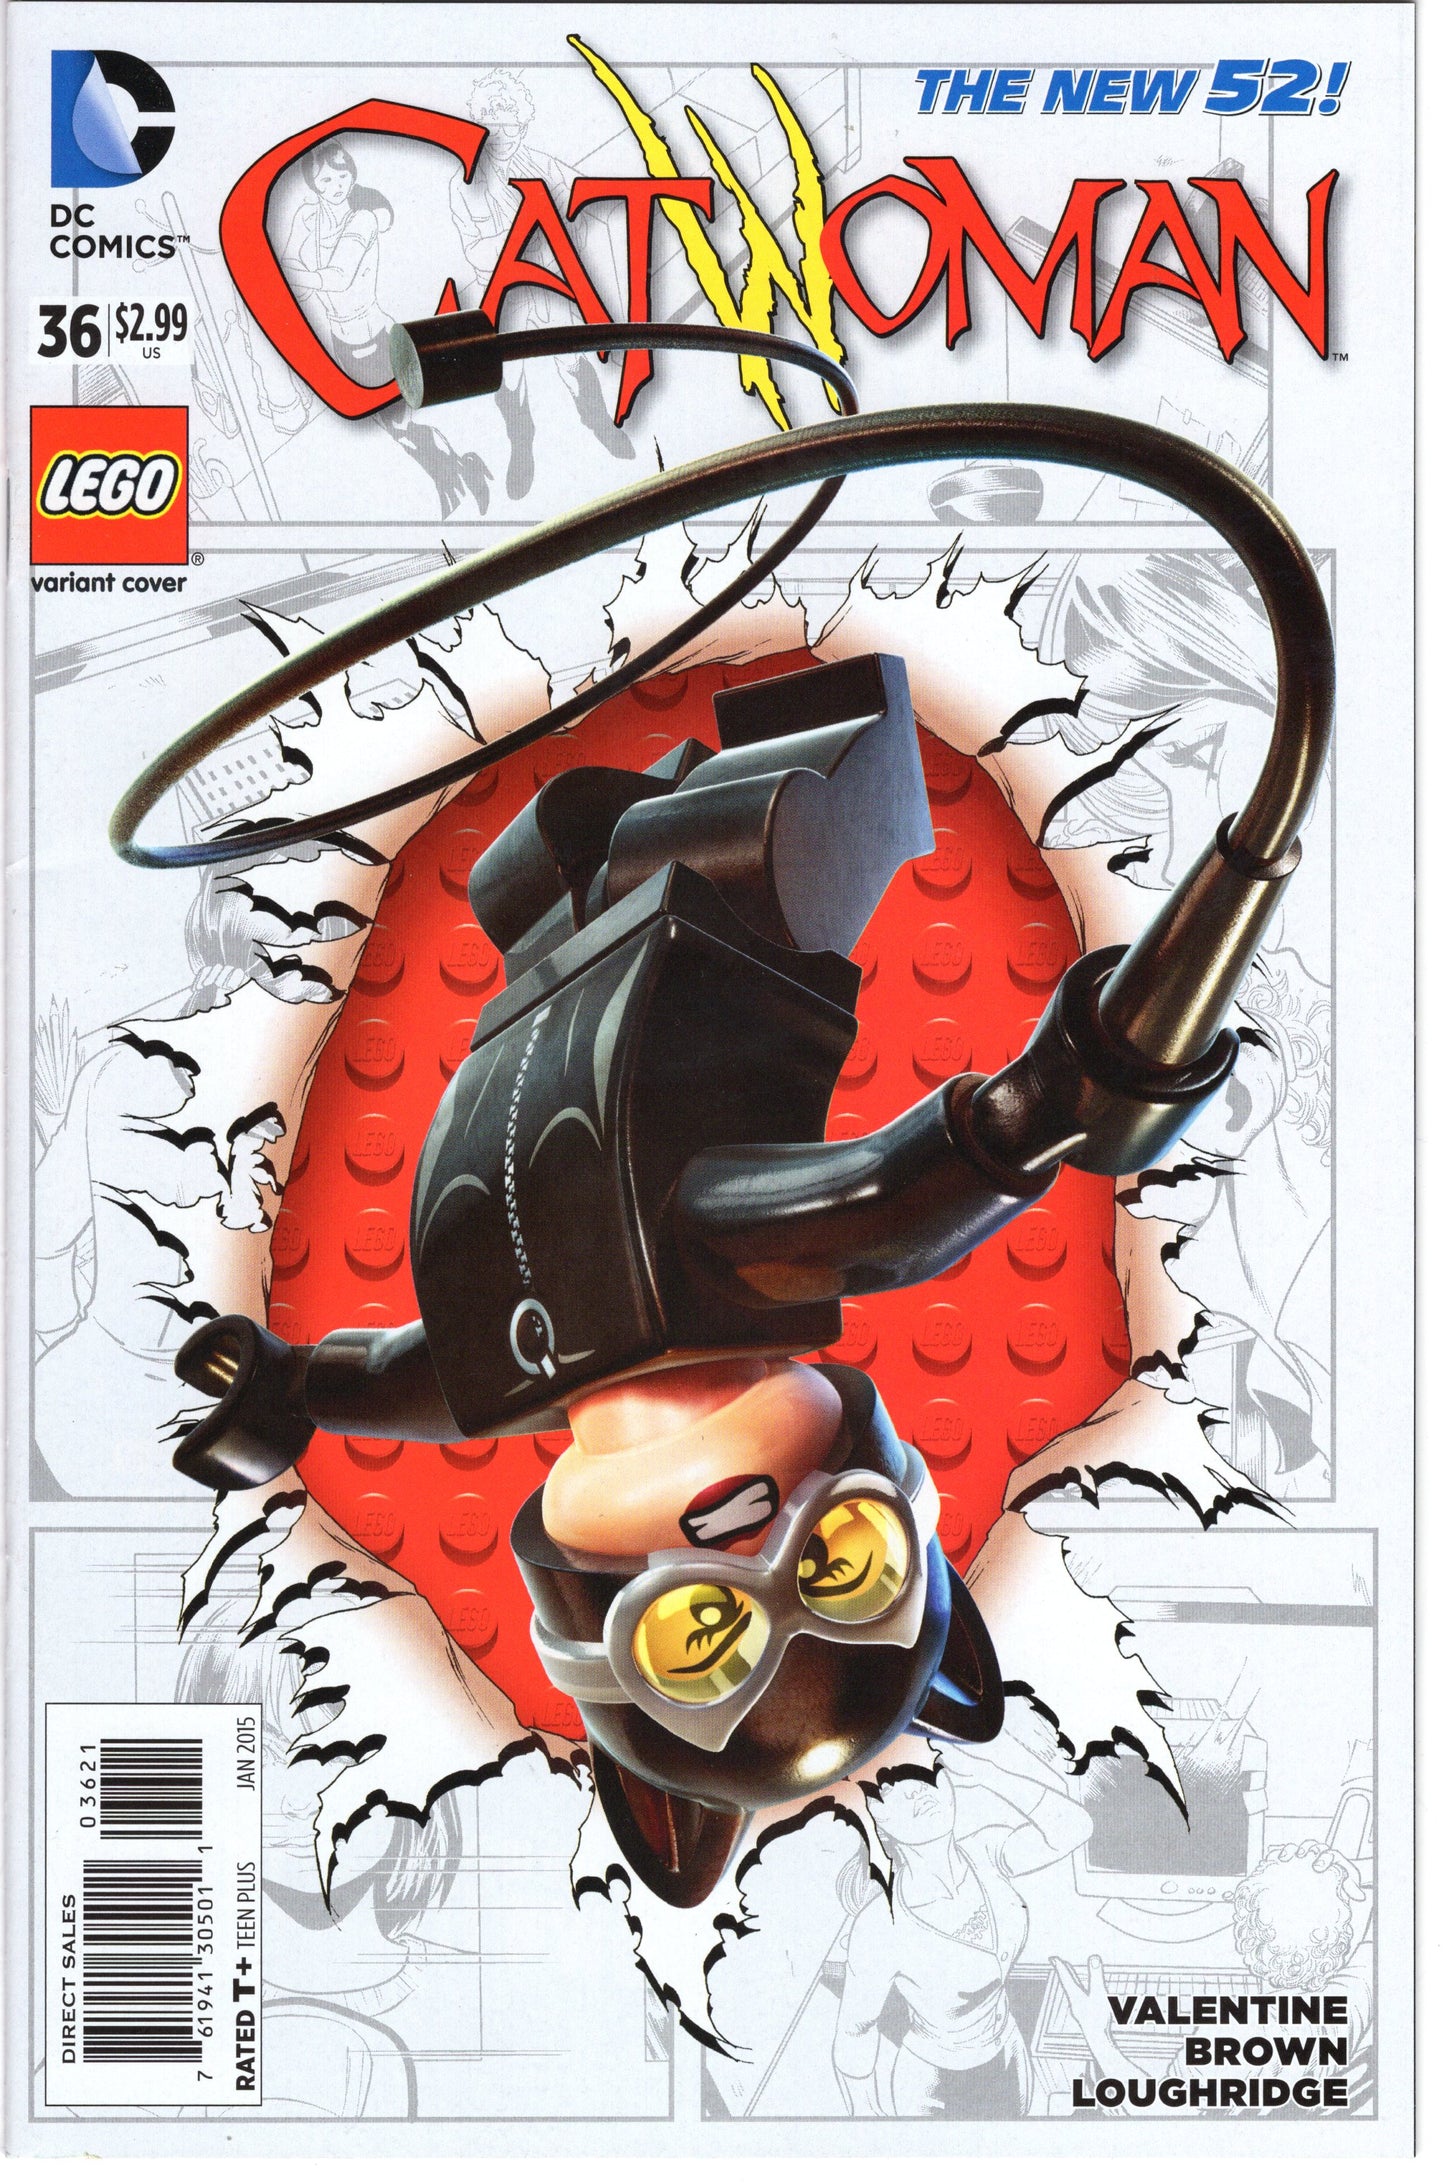 Catwoman - Issue #36 "Lego Variant Cover" The New 52! (Jan. 2015 - DC Comics) VF